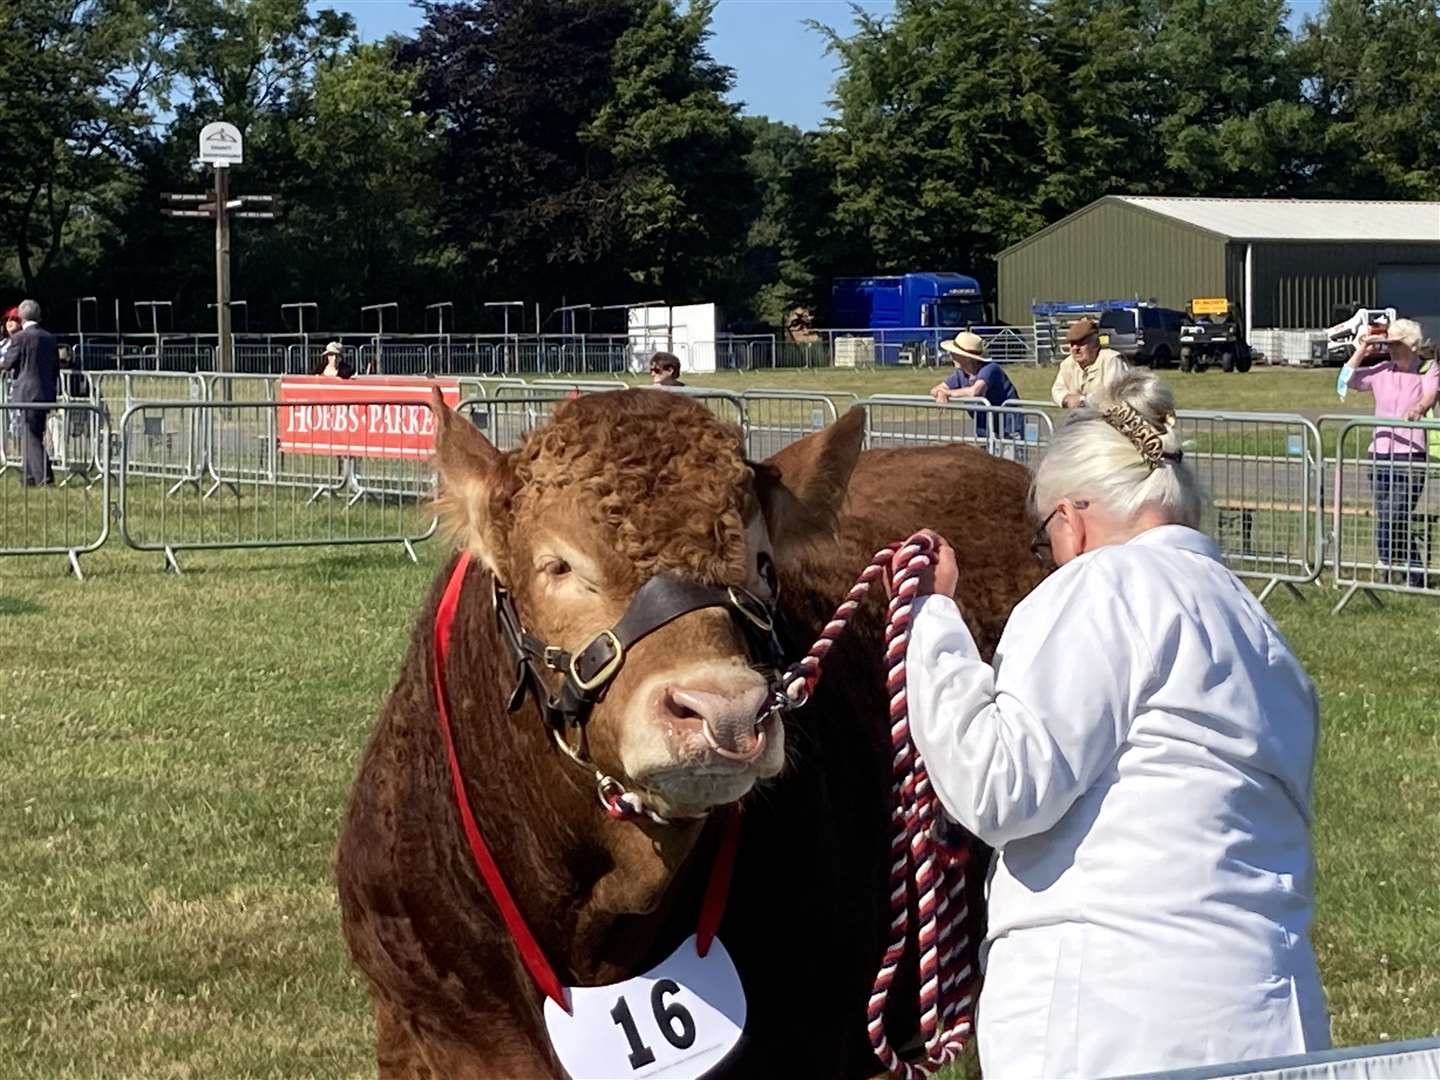 The Kent County Show 2022 is under way